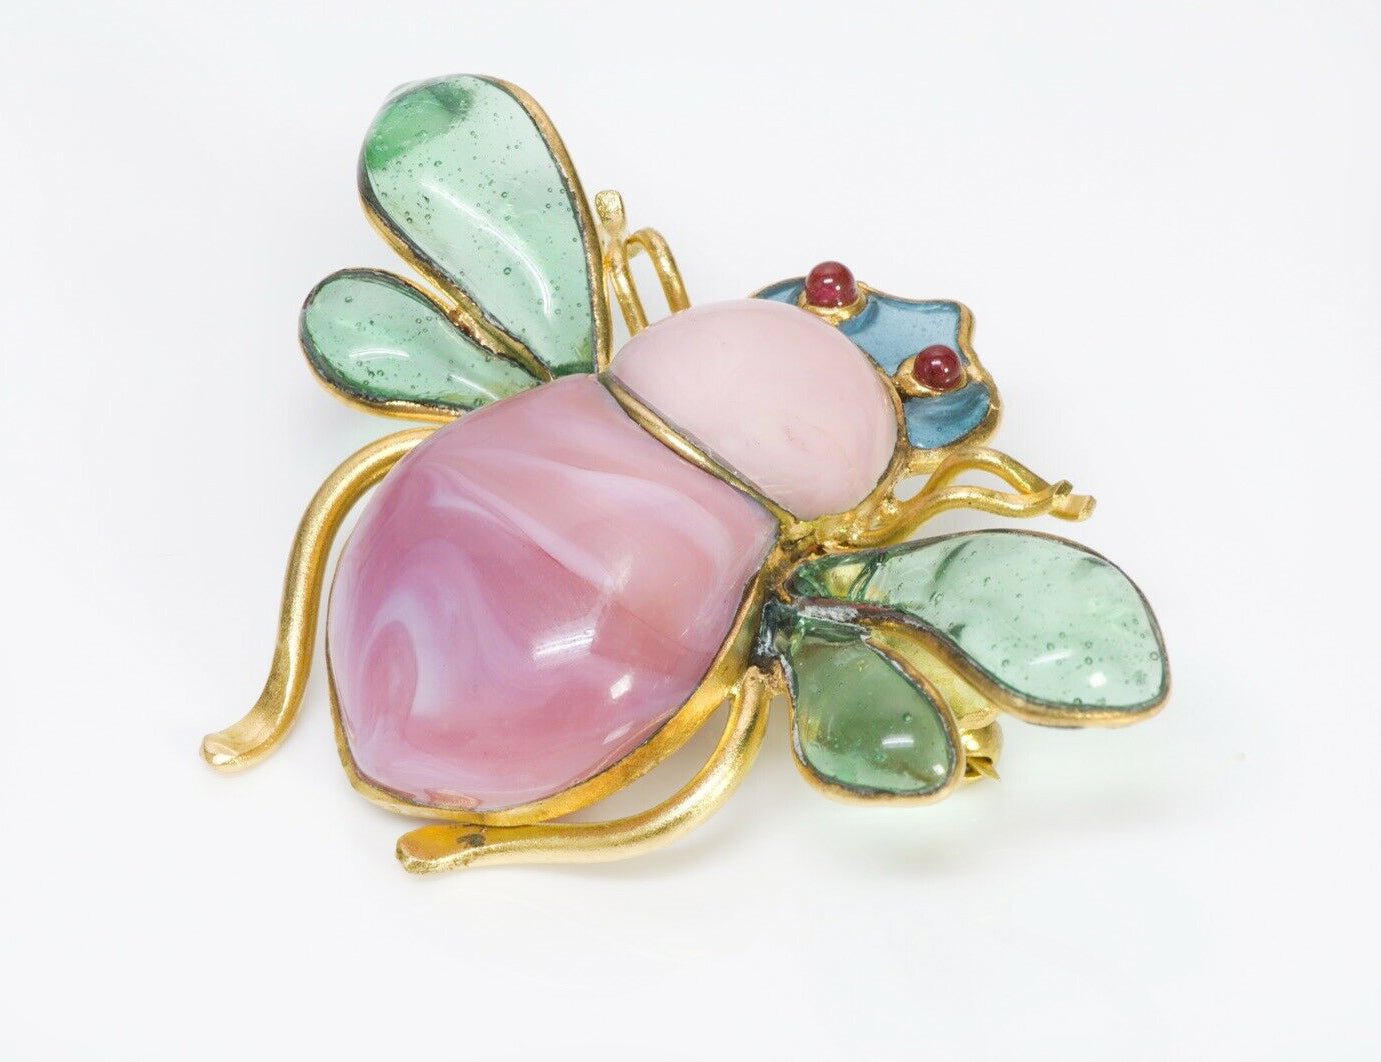 CHANEL 1993 Maison Gripoix Glass Royal Bee Brooch - DSF Antique Jewelry